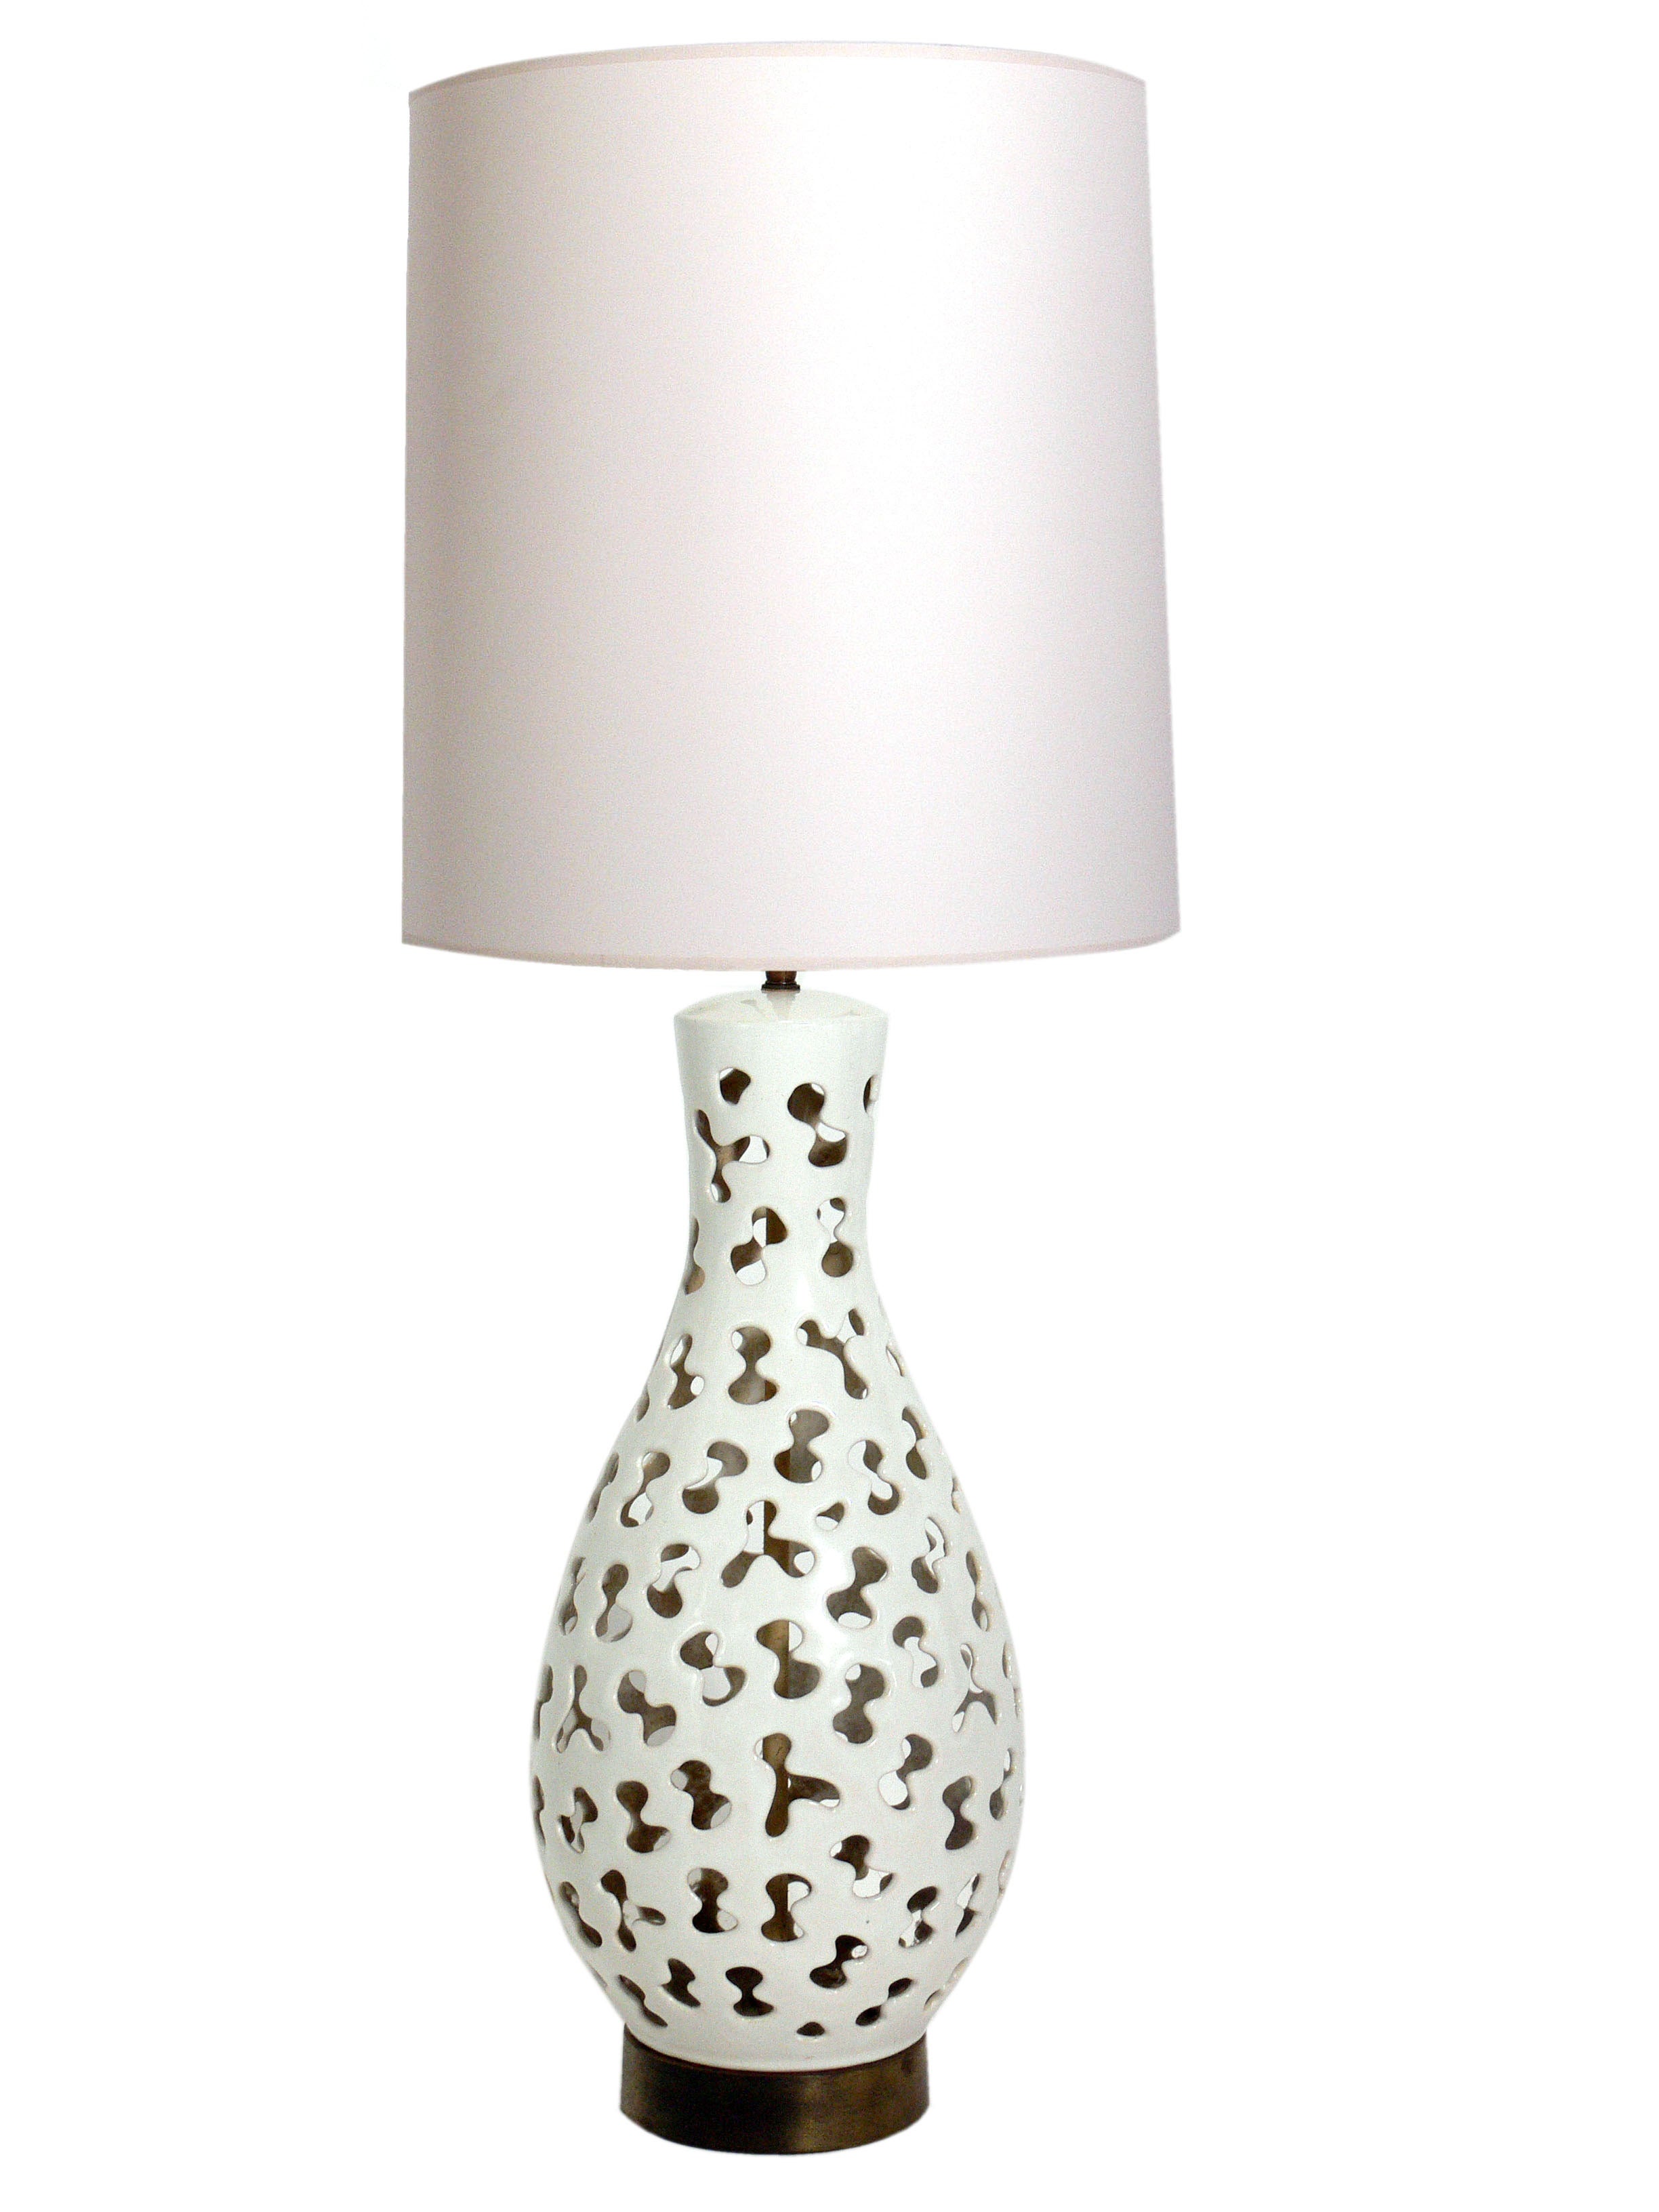 Large Sculptural Ceramic Lamp with Biomorphic Cut Outs